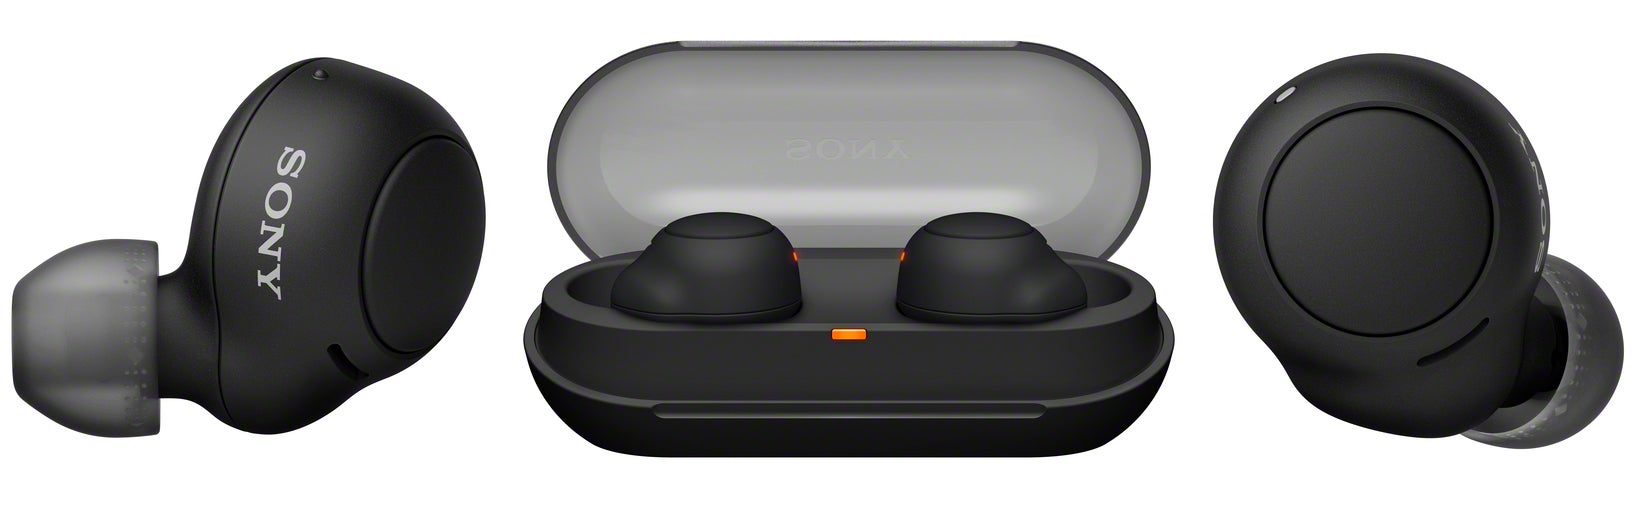 The new Sony WF-C500 wireless earbuds look similar to the company's WF-1000XM4, but with a smaller and lighter design that might better stay put in some user's ears. (Image: Sony)